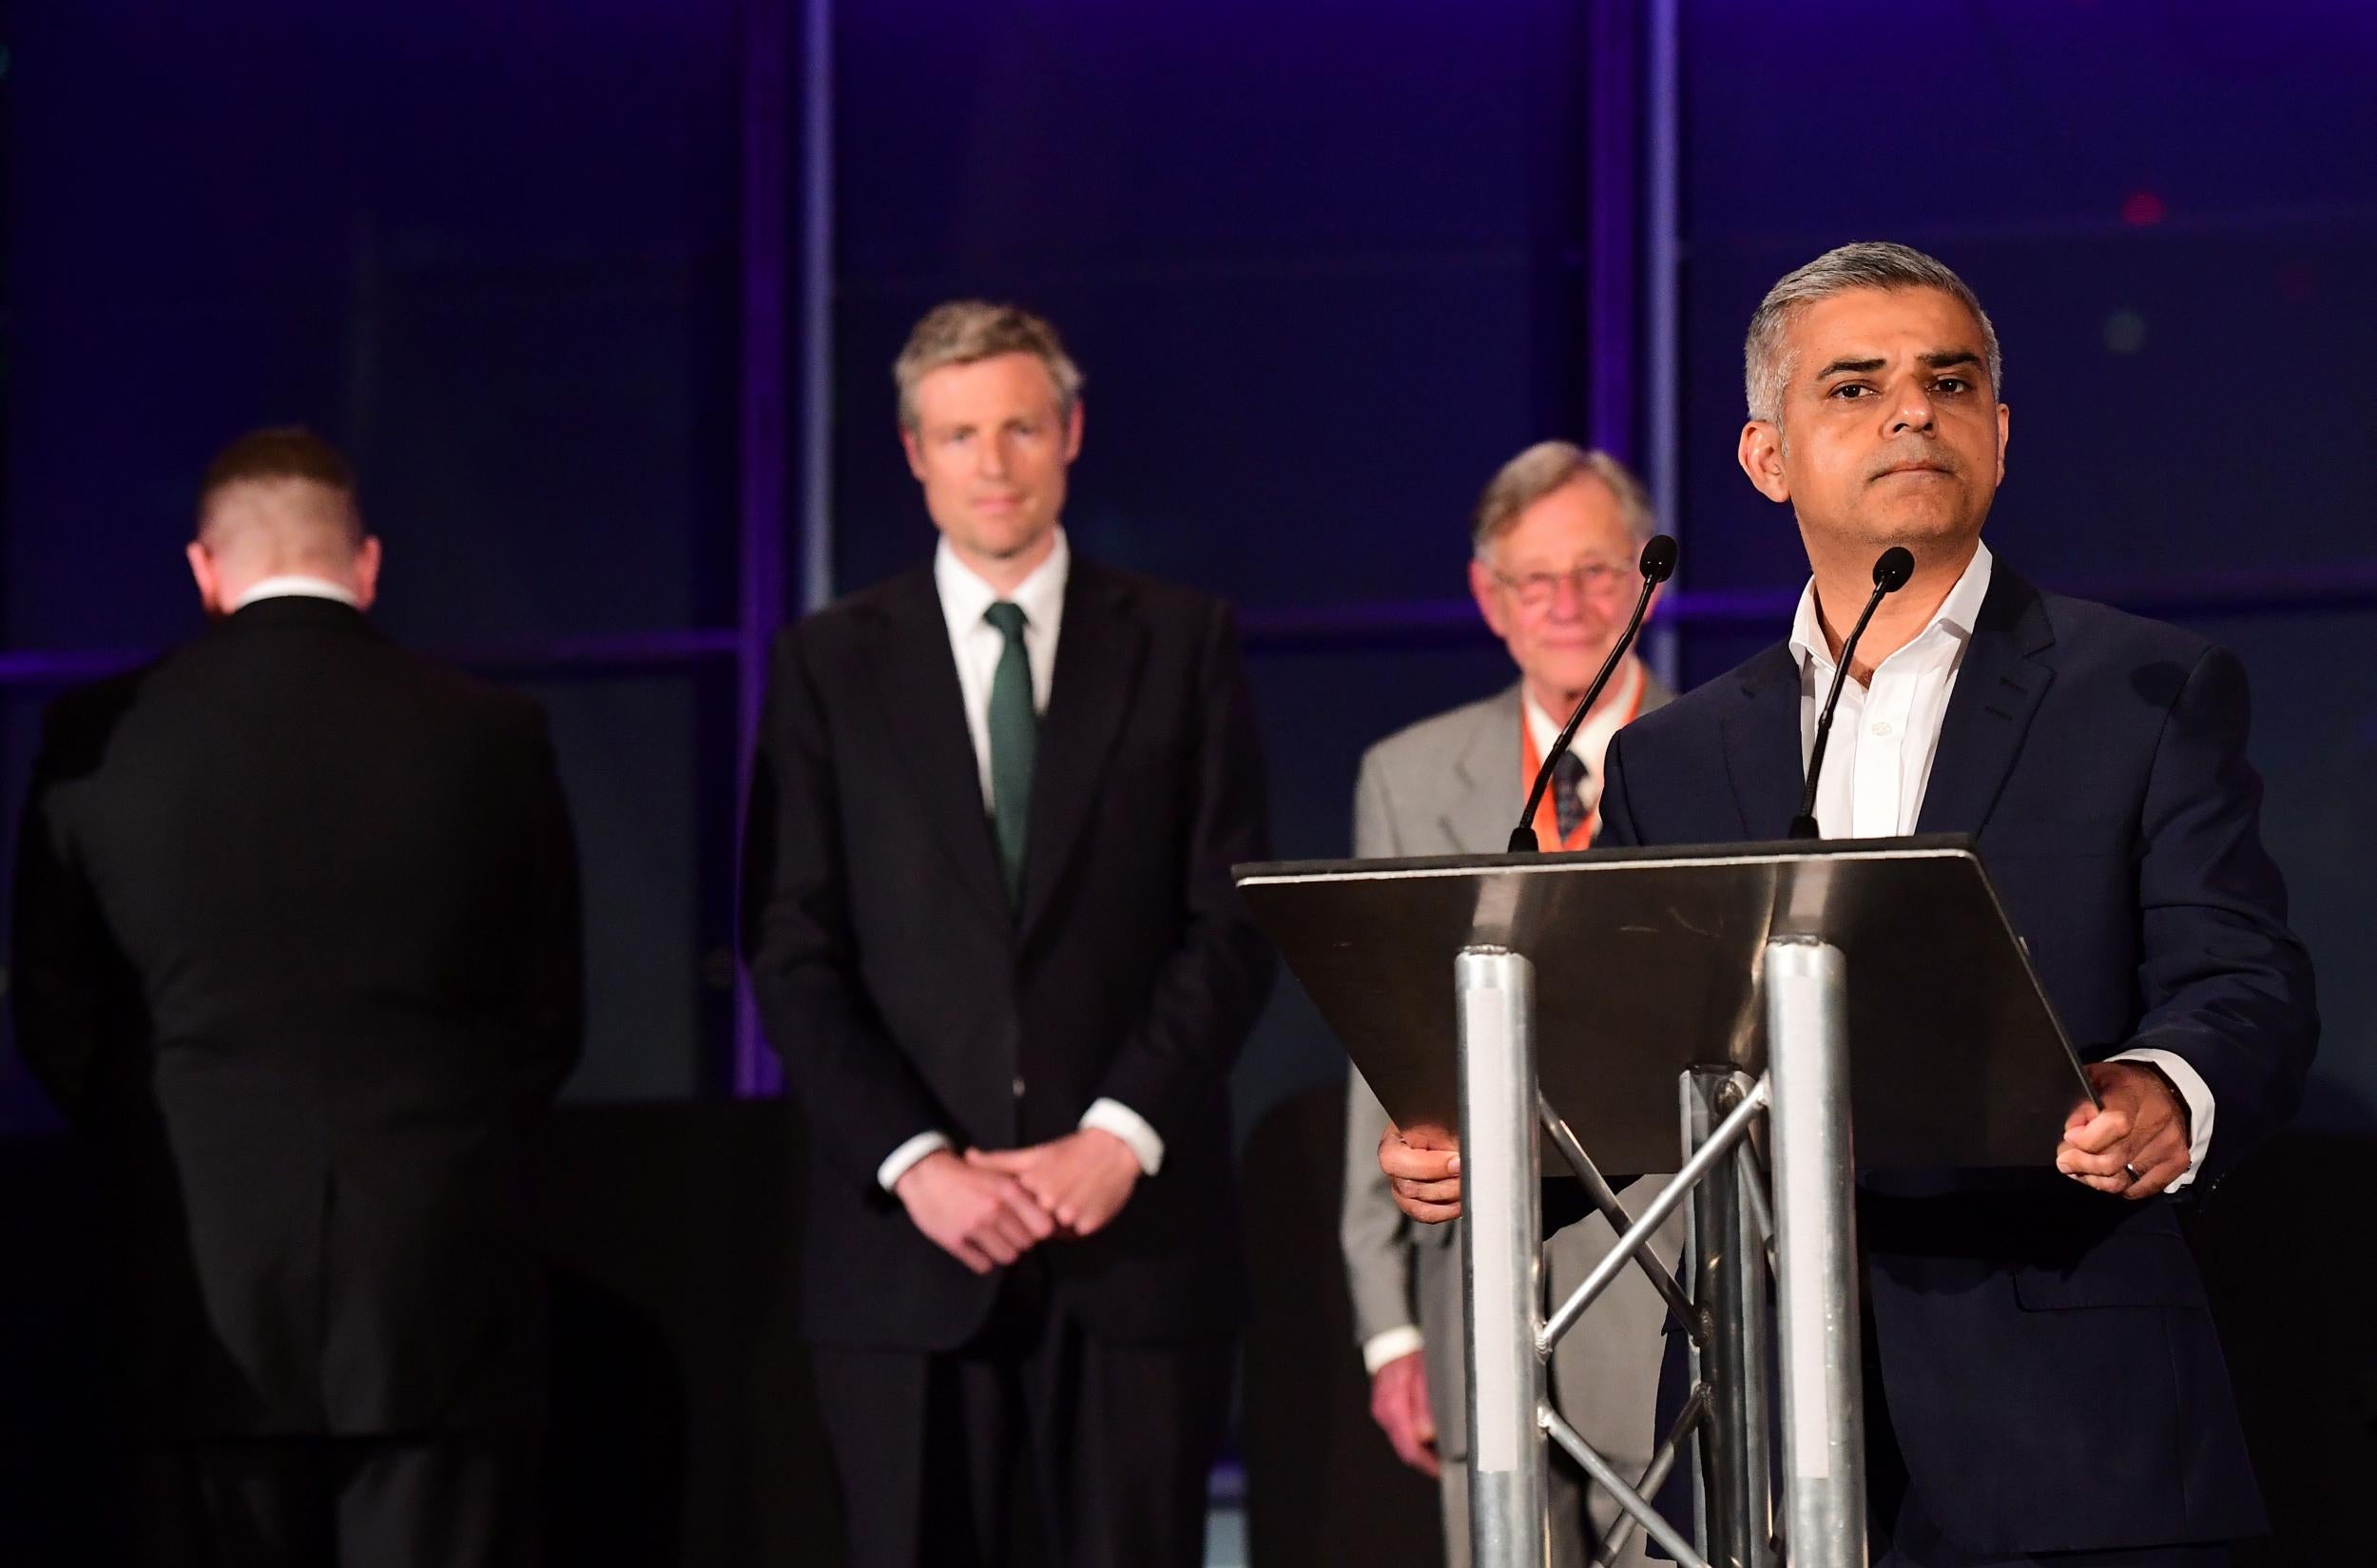 Paul Golding turns his back while Sadiq Khan gives hs victory speech at City Hall